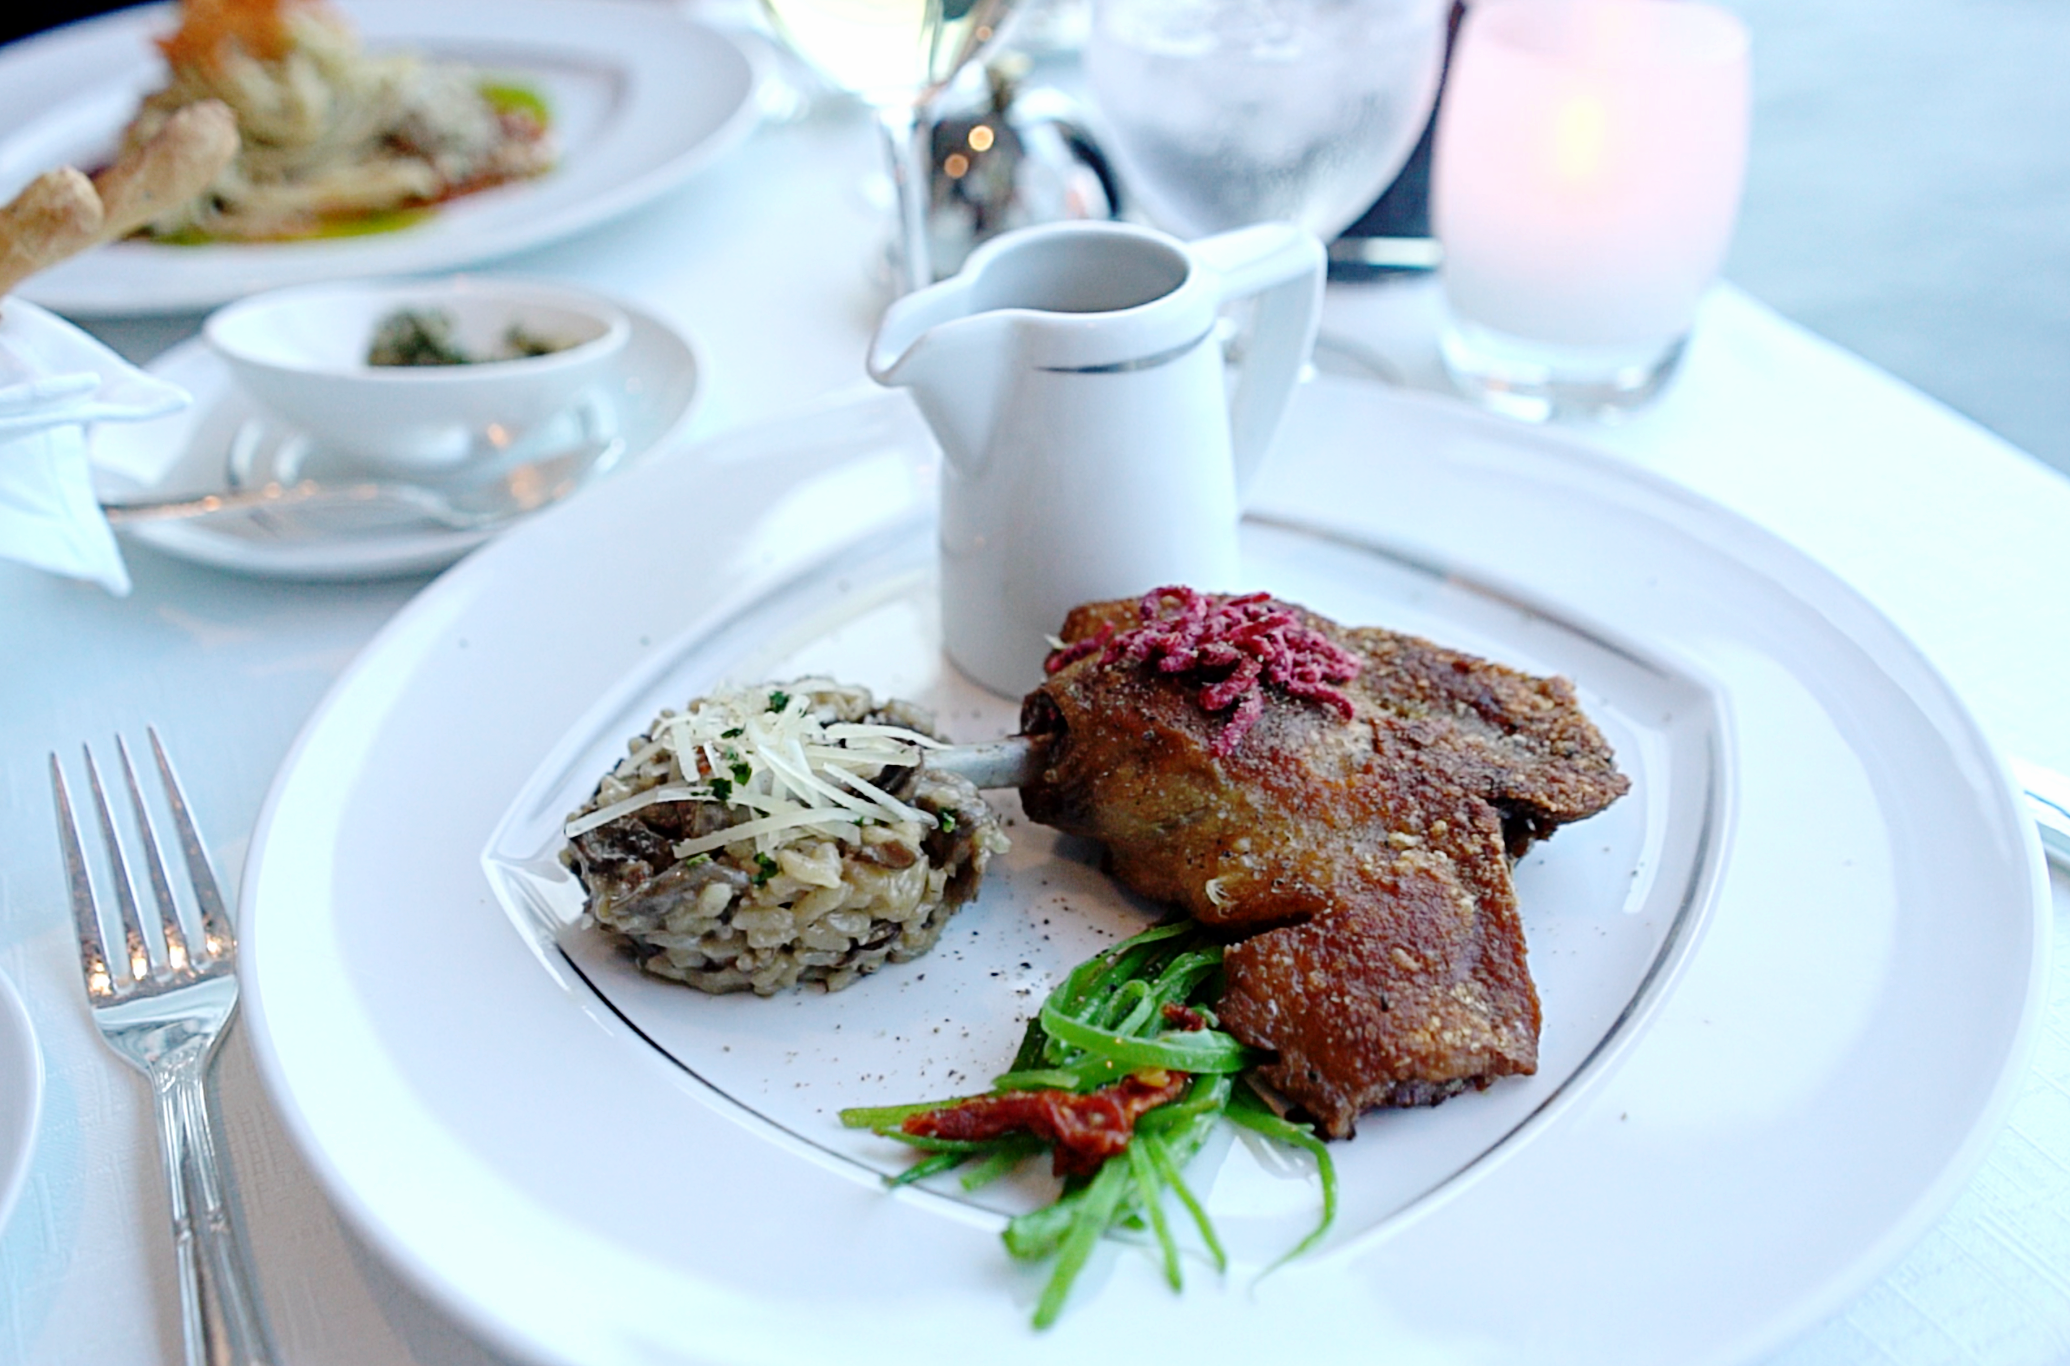  The mushroom risotto and duck leg confit in the Aqualina restaurant.  